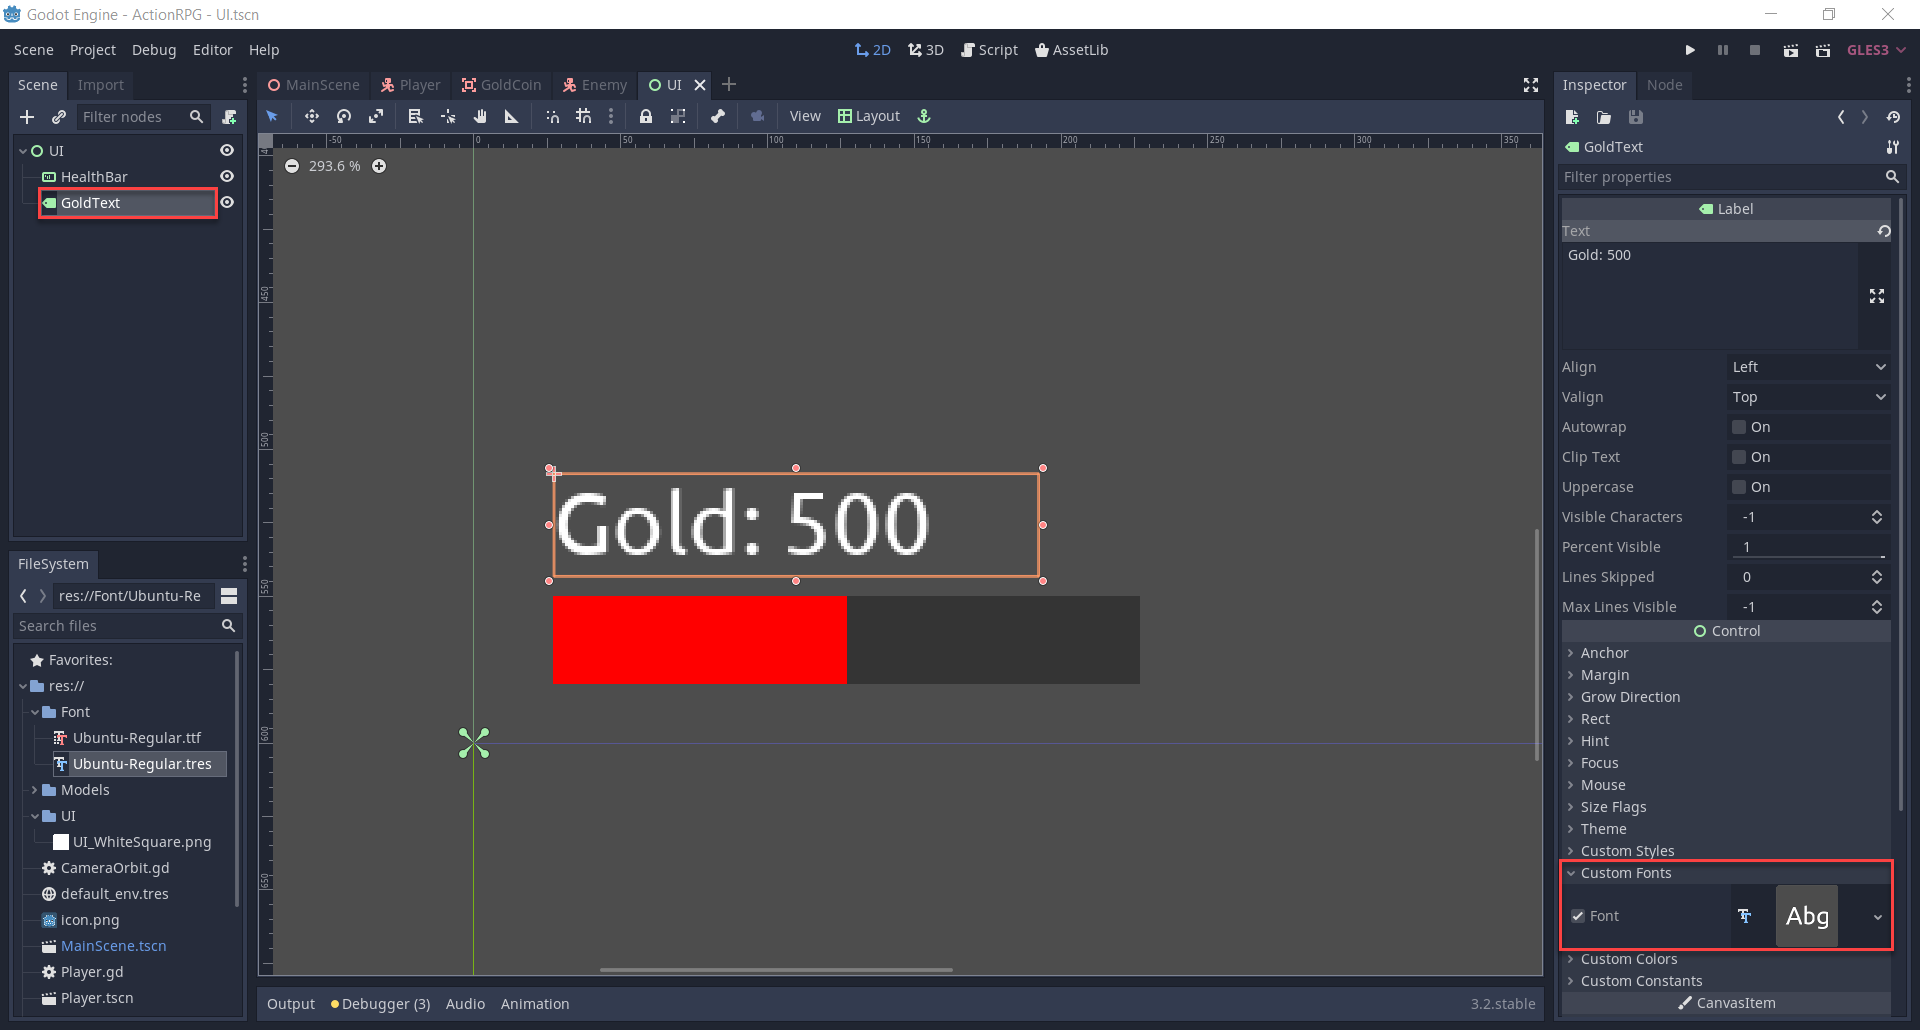 Godot UI text for gold amount